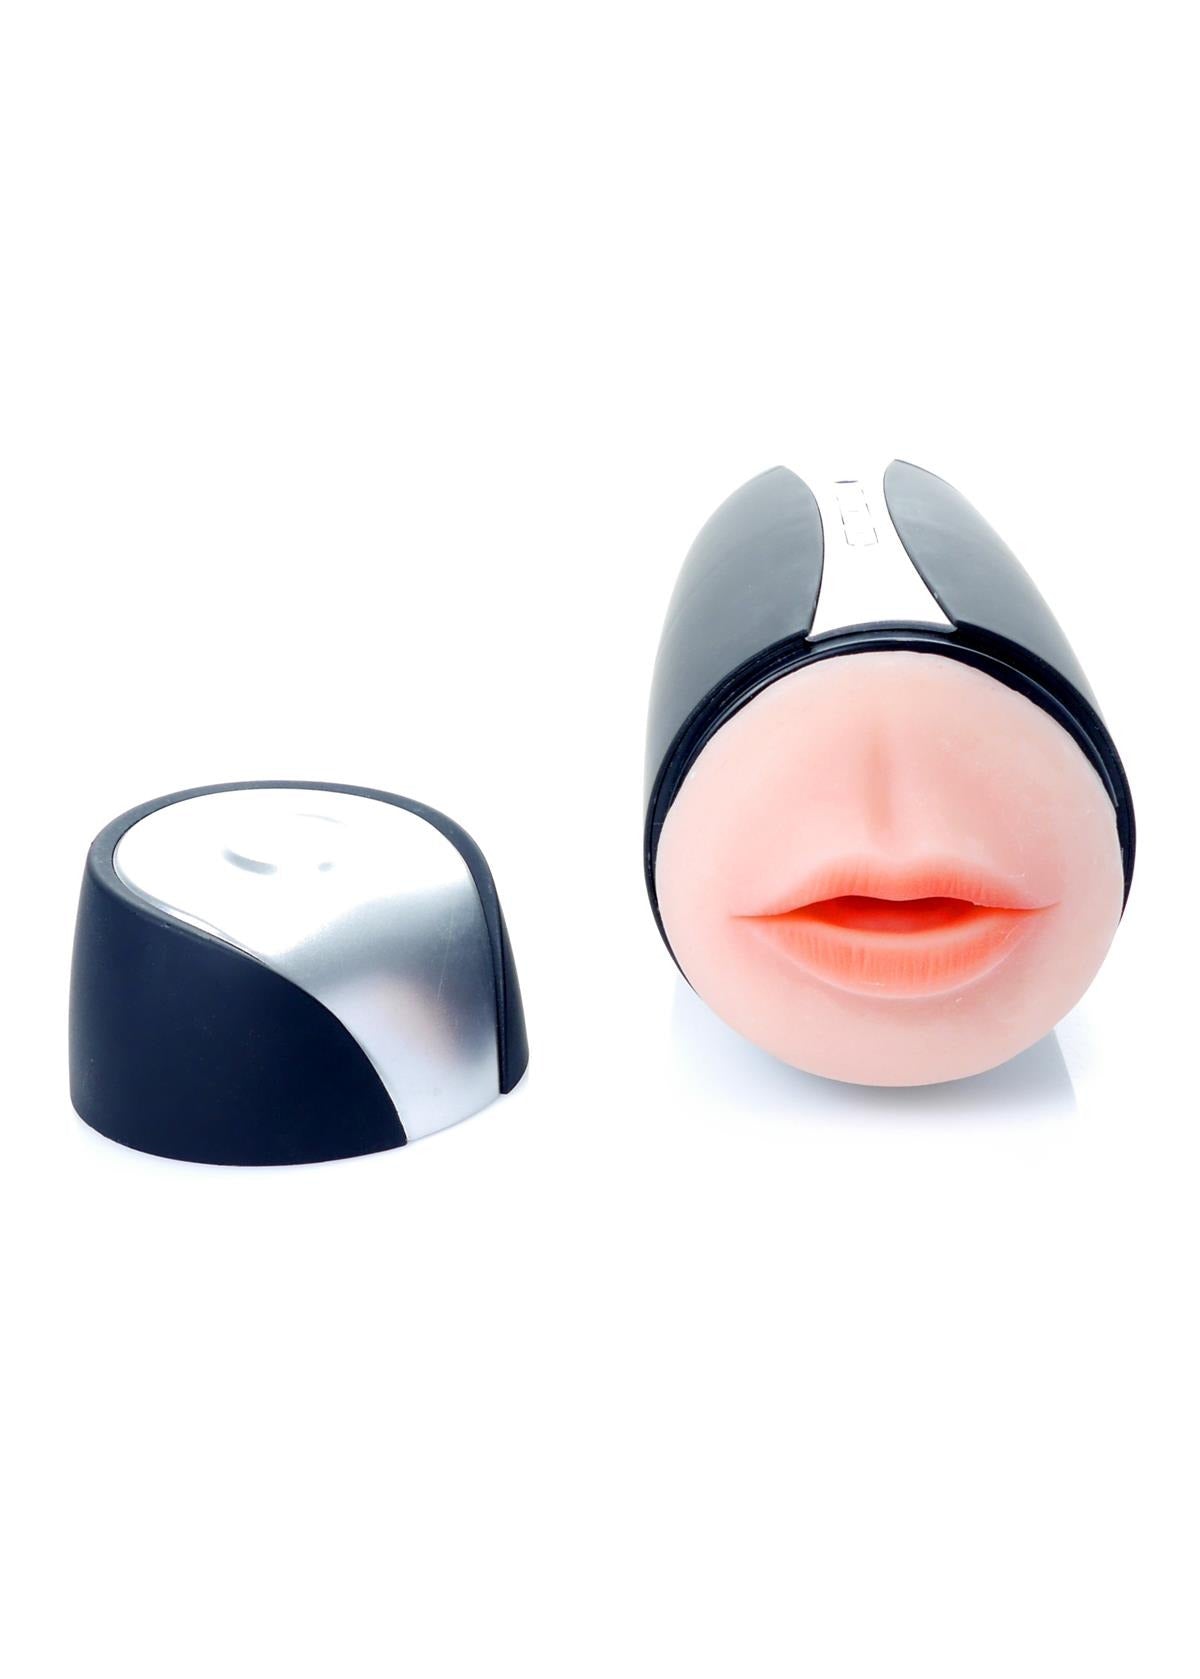 Bossoftoys Susan Double Delight Masturbator Vagina & Mouth - 36 function - usb rechargeable - 26-00132